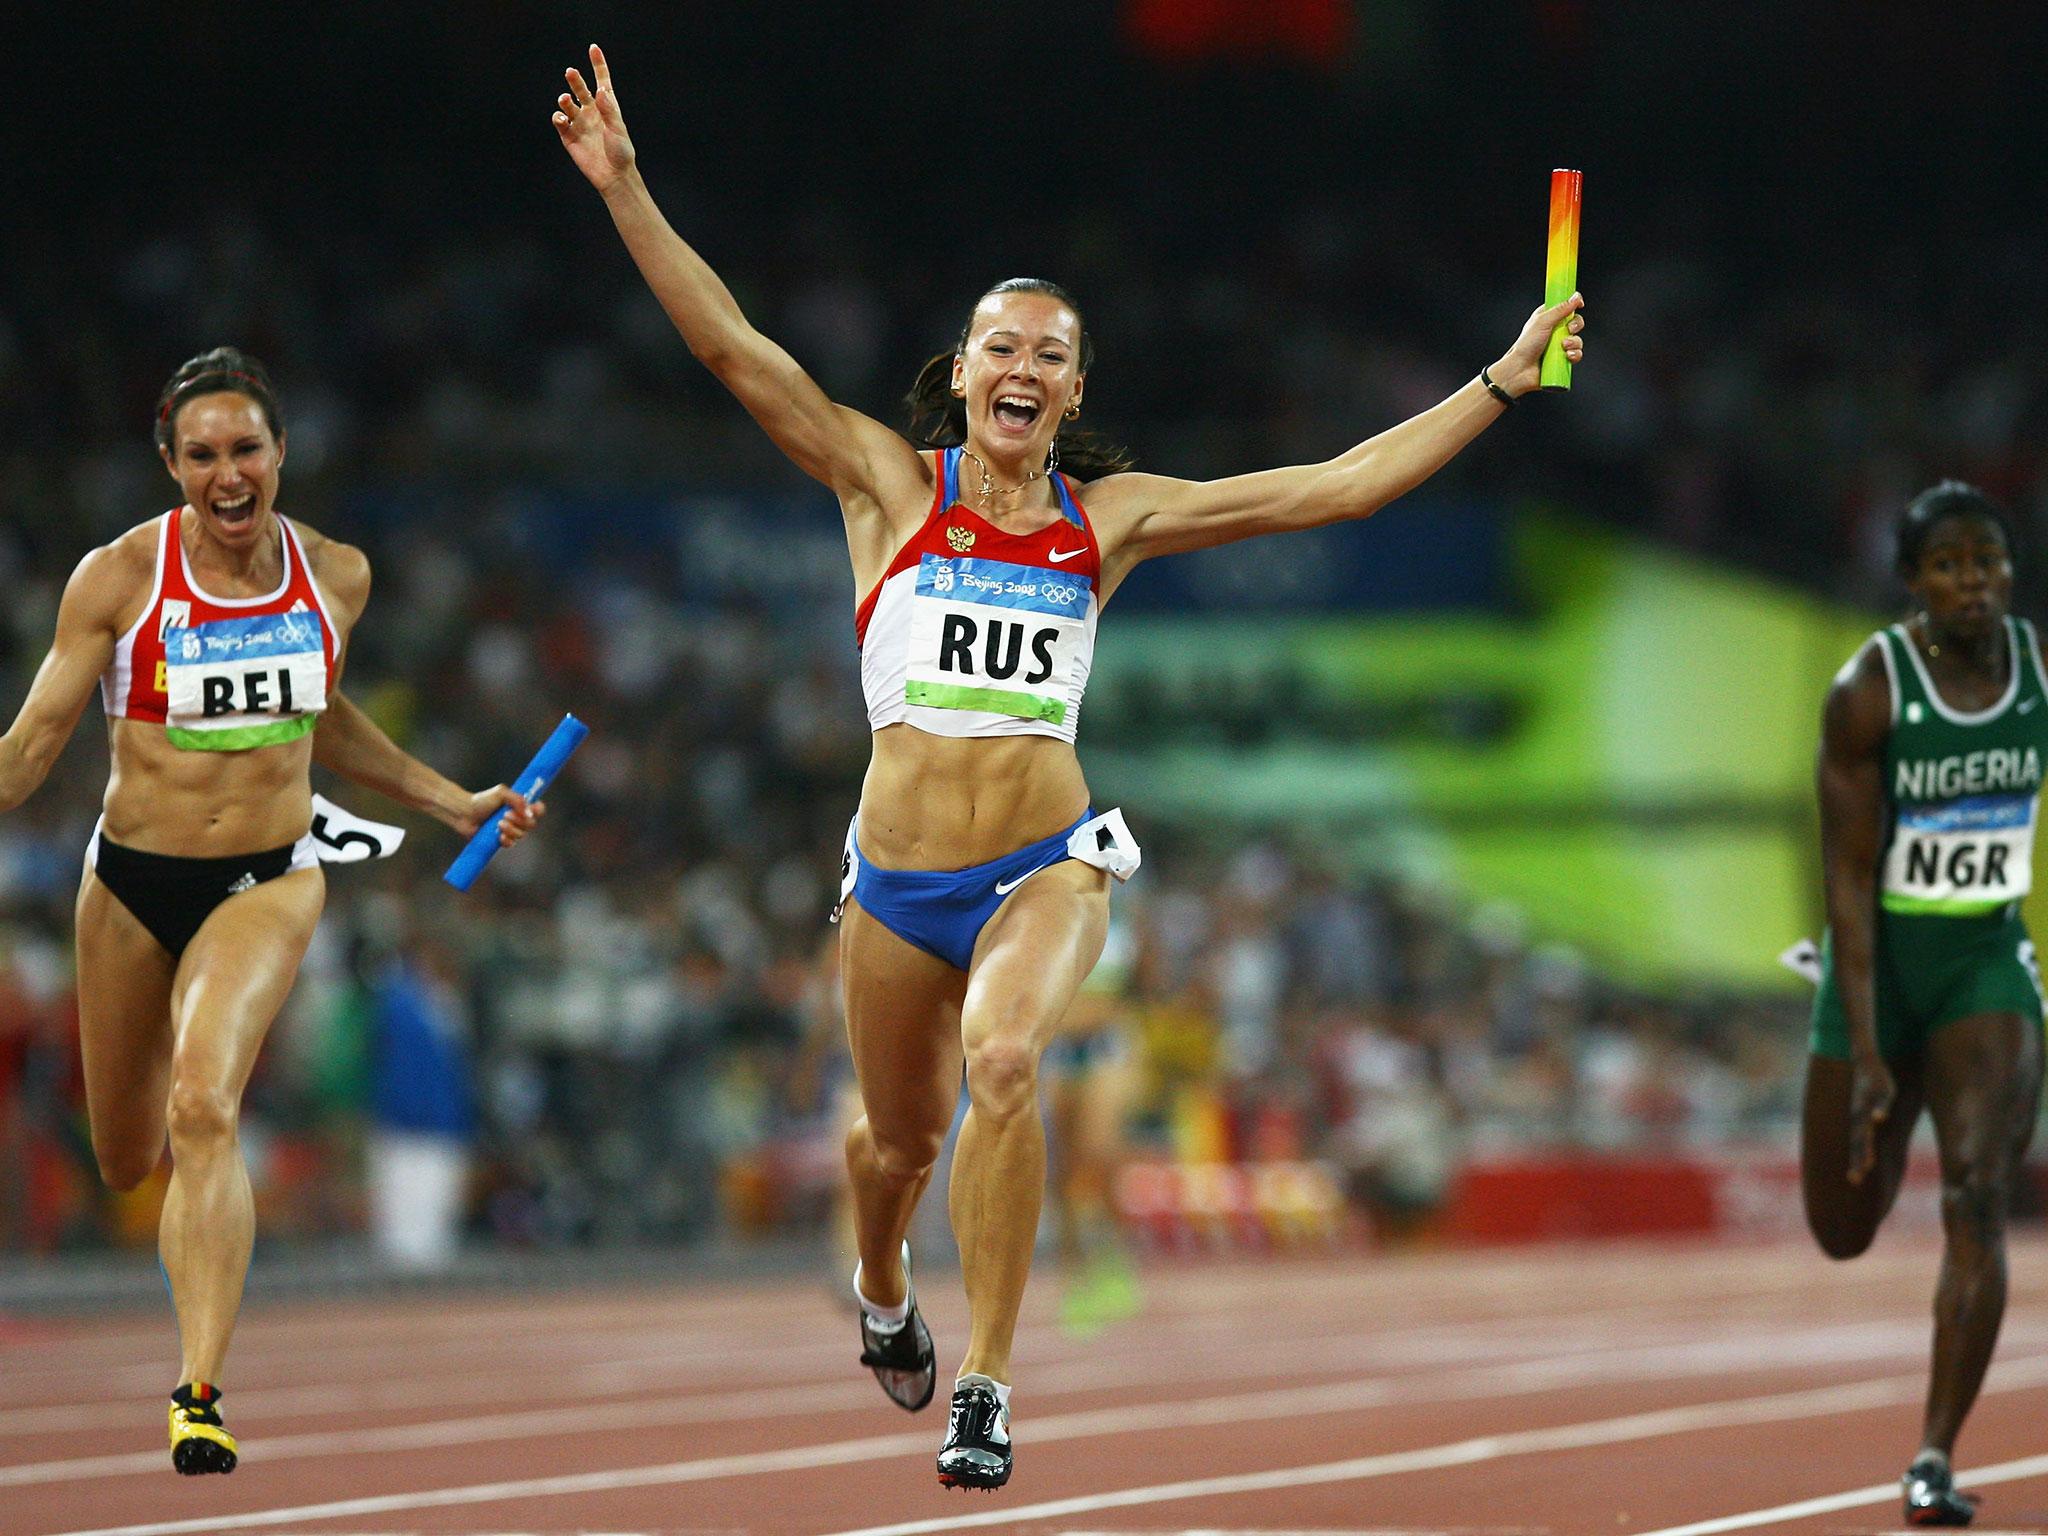 Russian runner stripped of 2008 Olympics gold after failing doping test